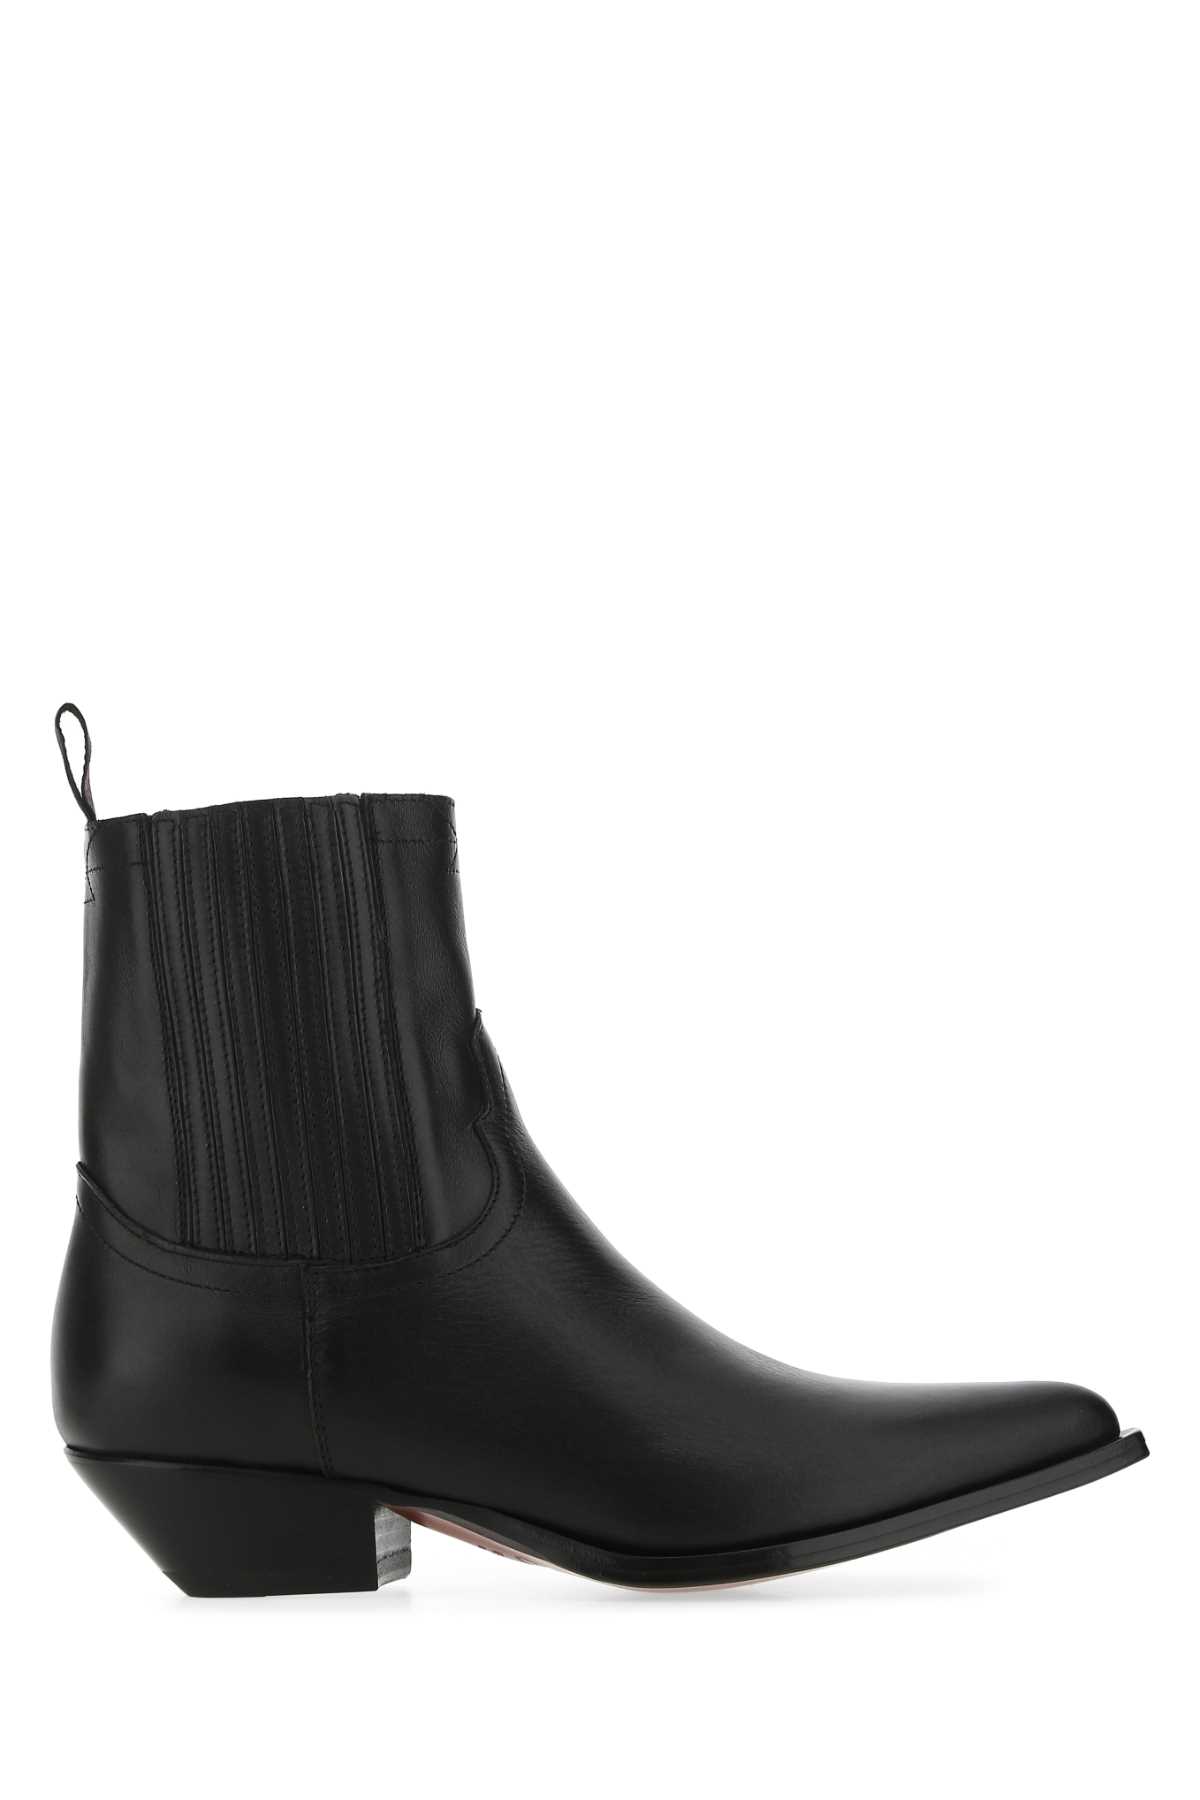 Black Leather Hidalgo Ankle Boots